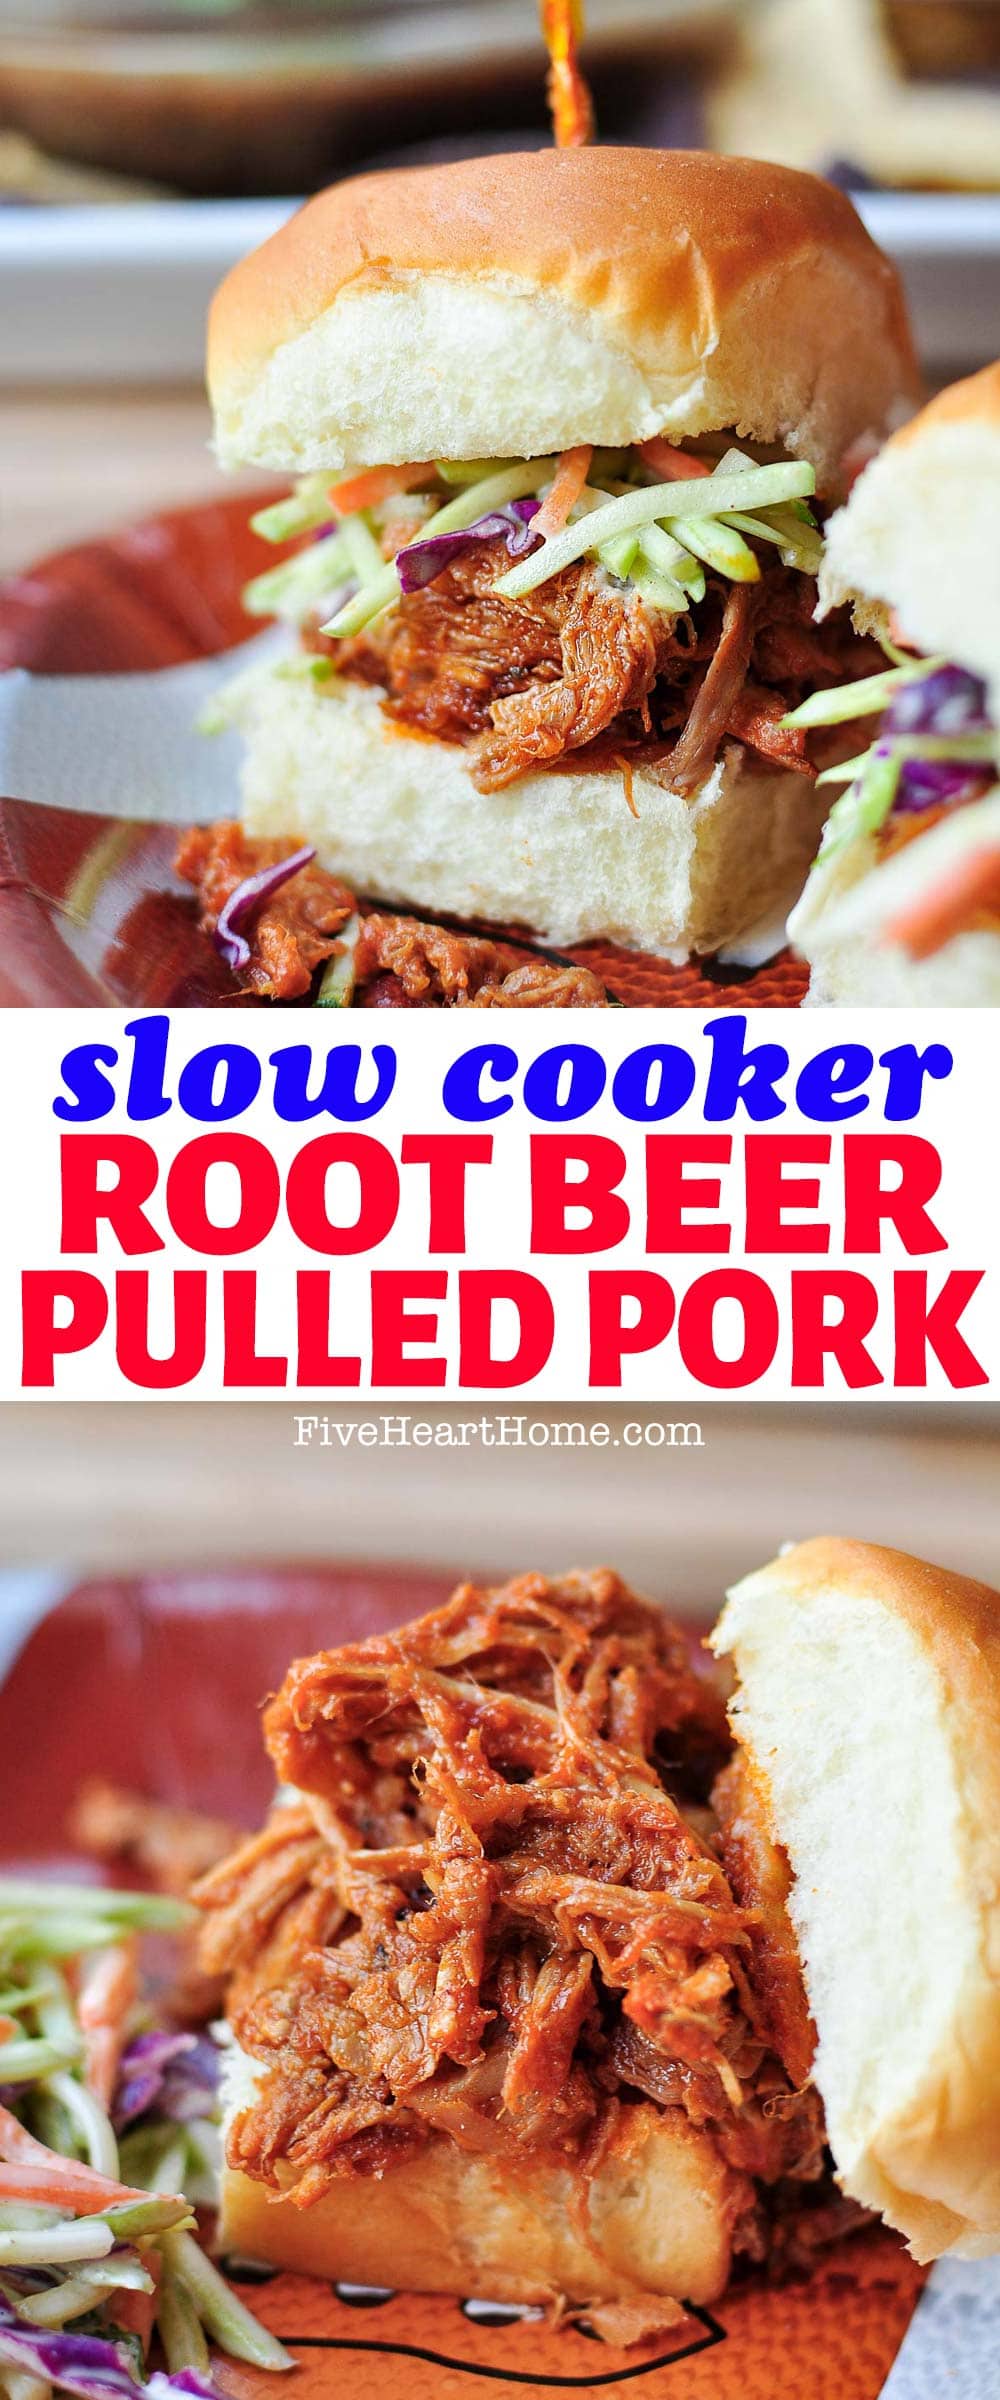 Slow Cooker Root Beer Pulled Pork ~ this tender, juicy pulled pork is quick and effortless to throw in the crockpot for an easy, make-ahead, family-pleasing dinner that's also perfect for game day, parties, or potlucks! Drenched in a fantastic homemade BBQ sauce, it can be piled on buns or sliders and topped with a creamy slaw for a meal that everyone will love. | FiveHeartHome.com via @fivehearthome